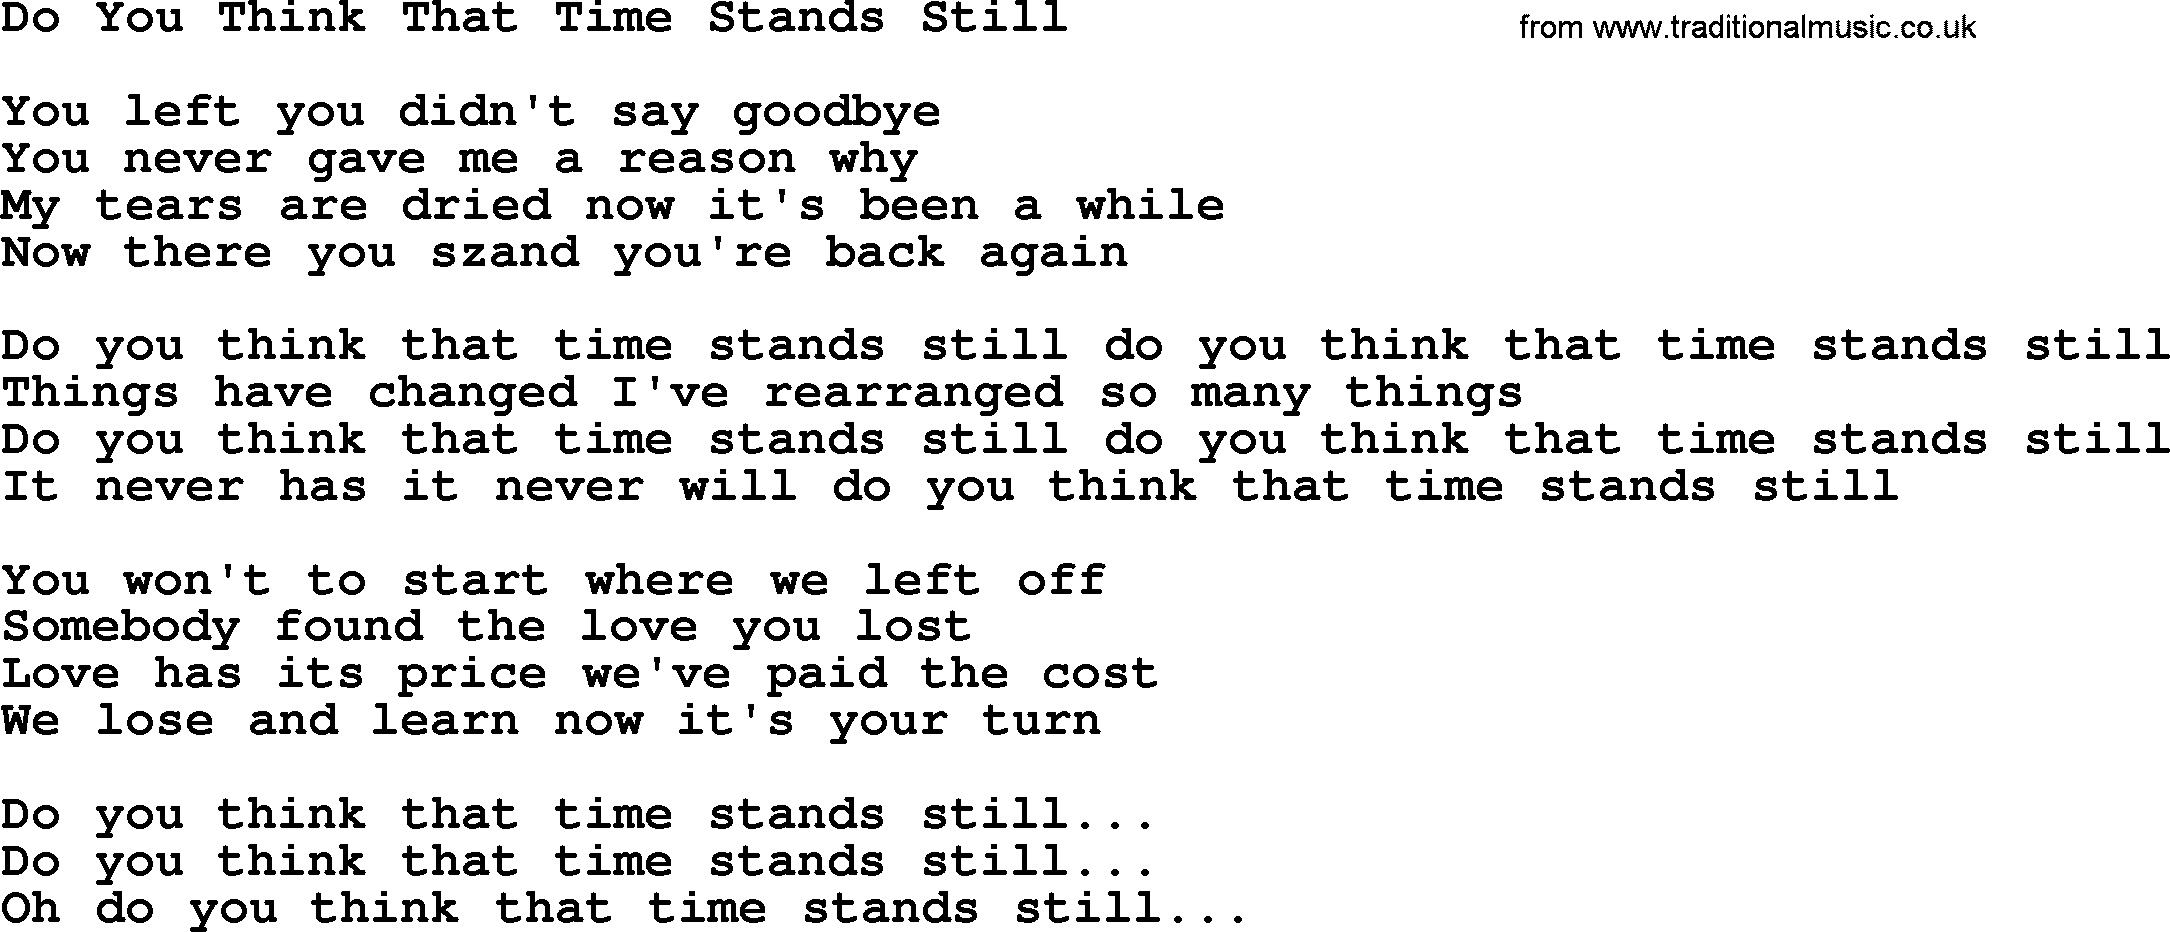 Dolly Parton song Do You Think That Time Stands Still.txt lyrics